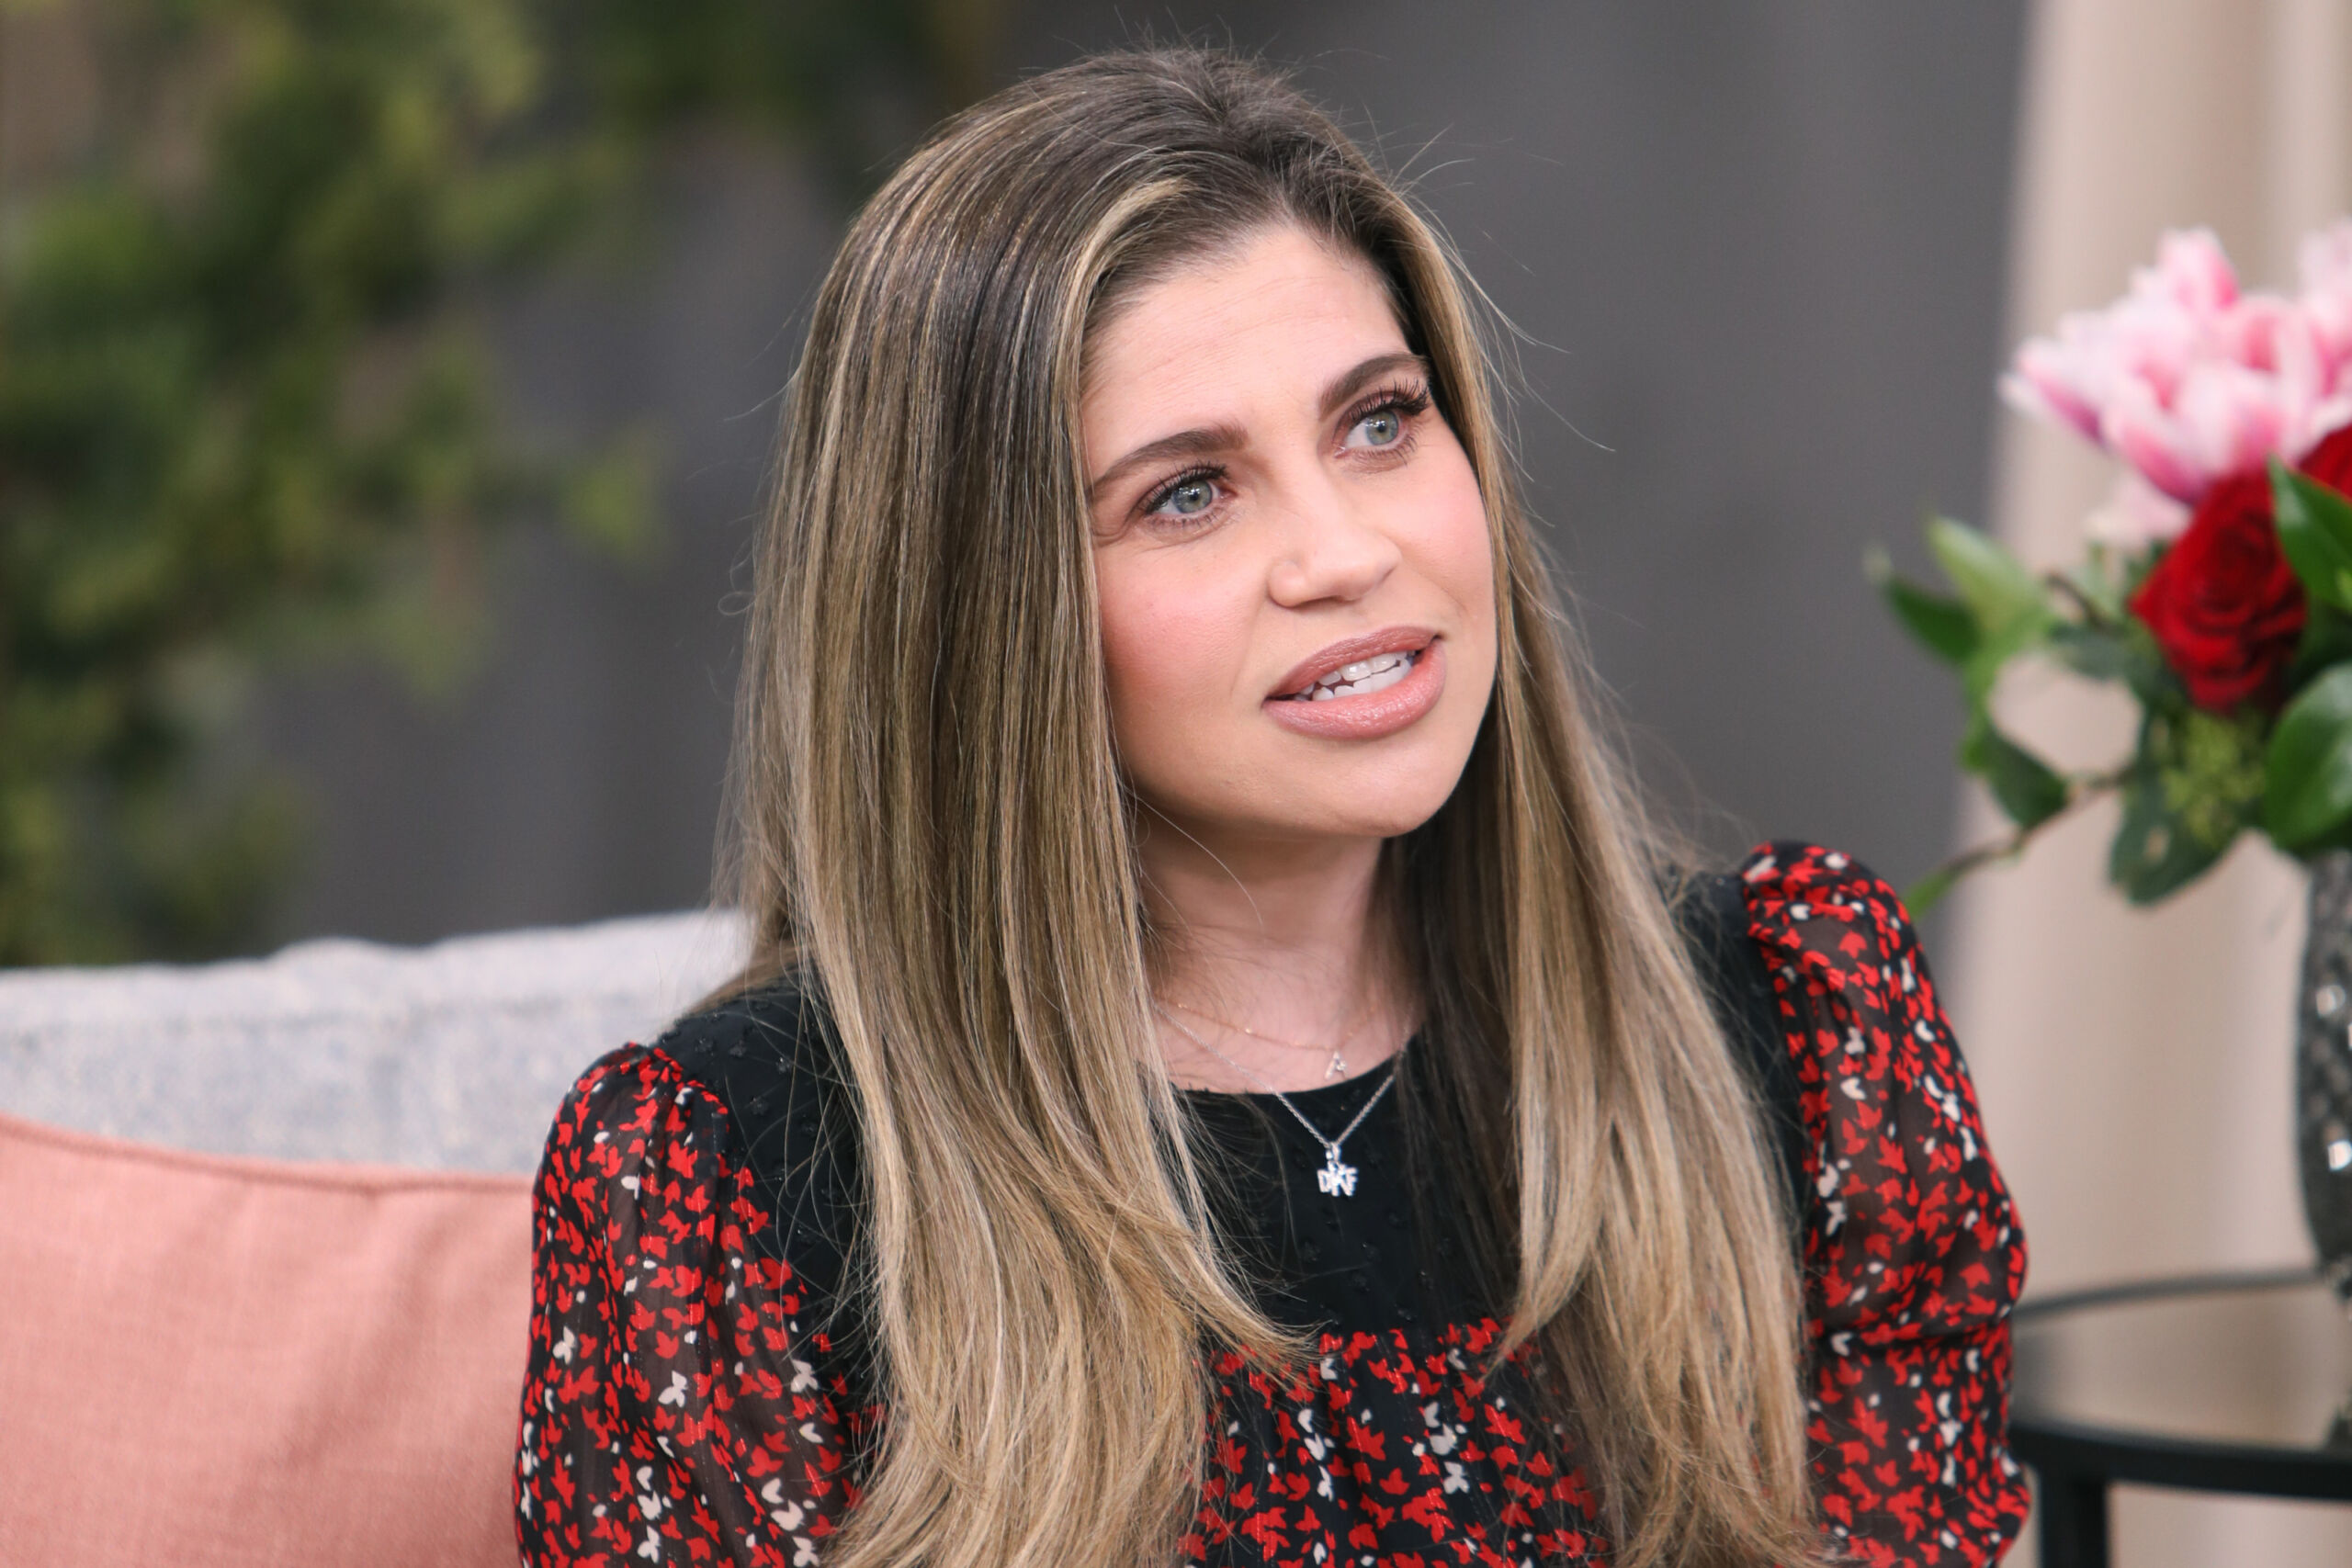 Boy Meets World Star Danielle Fishel opens up about being viewed as a teen sex object